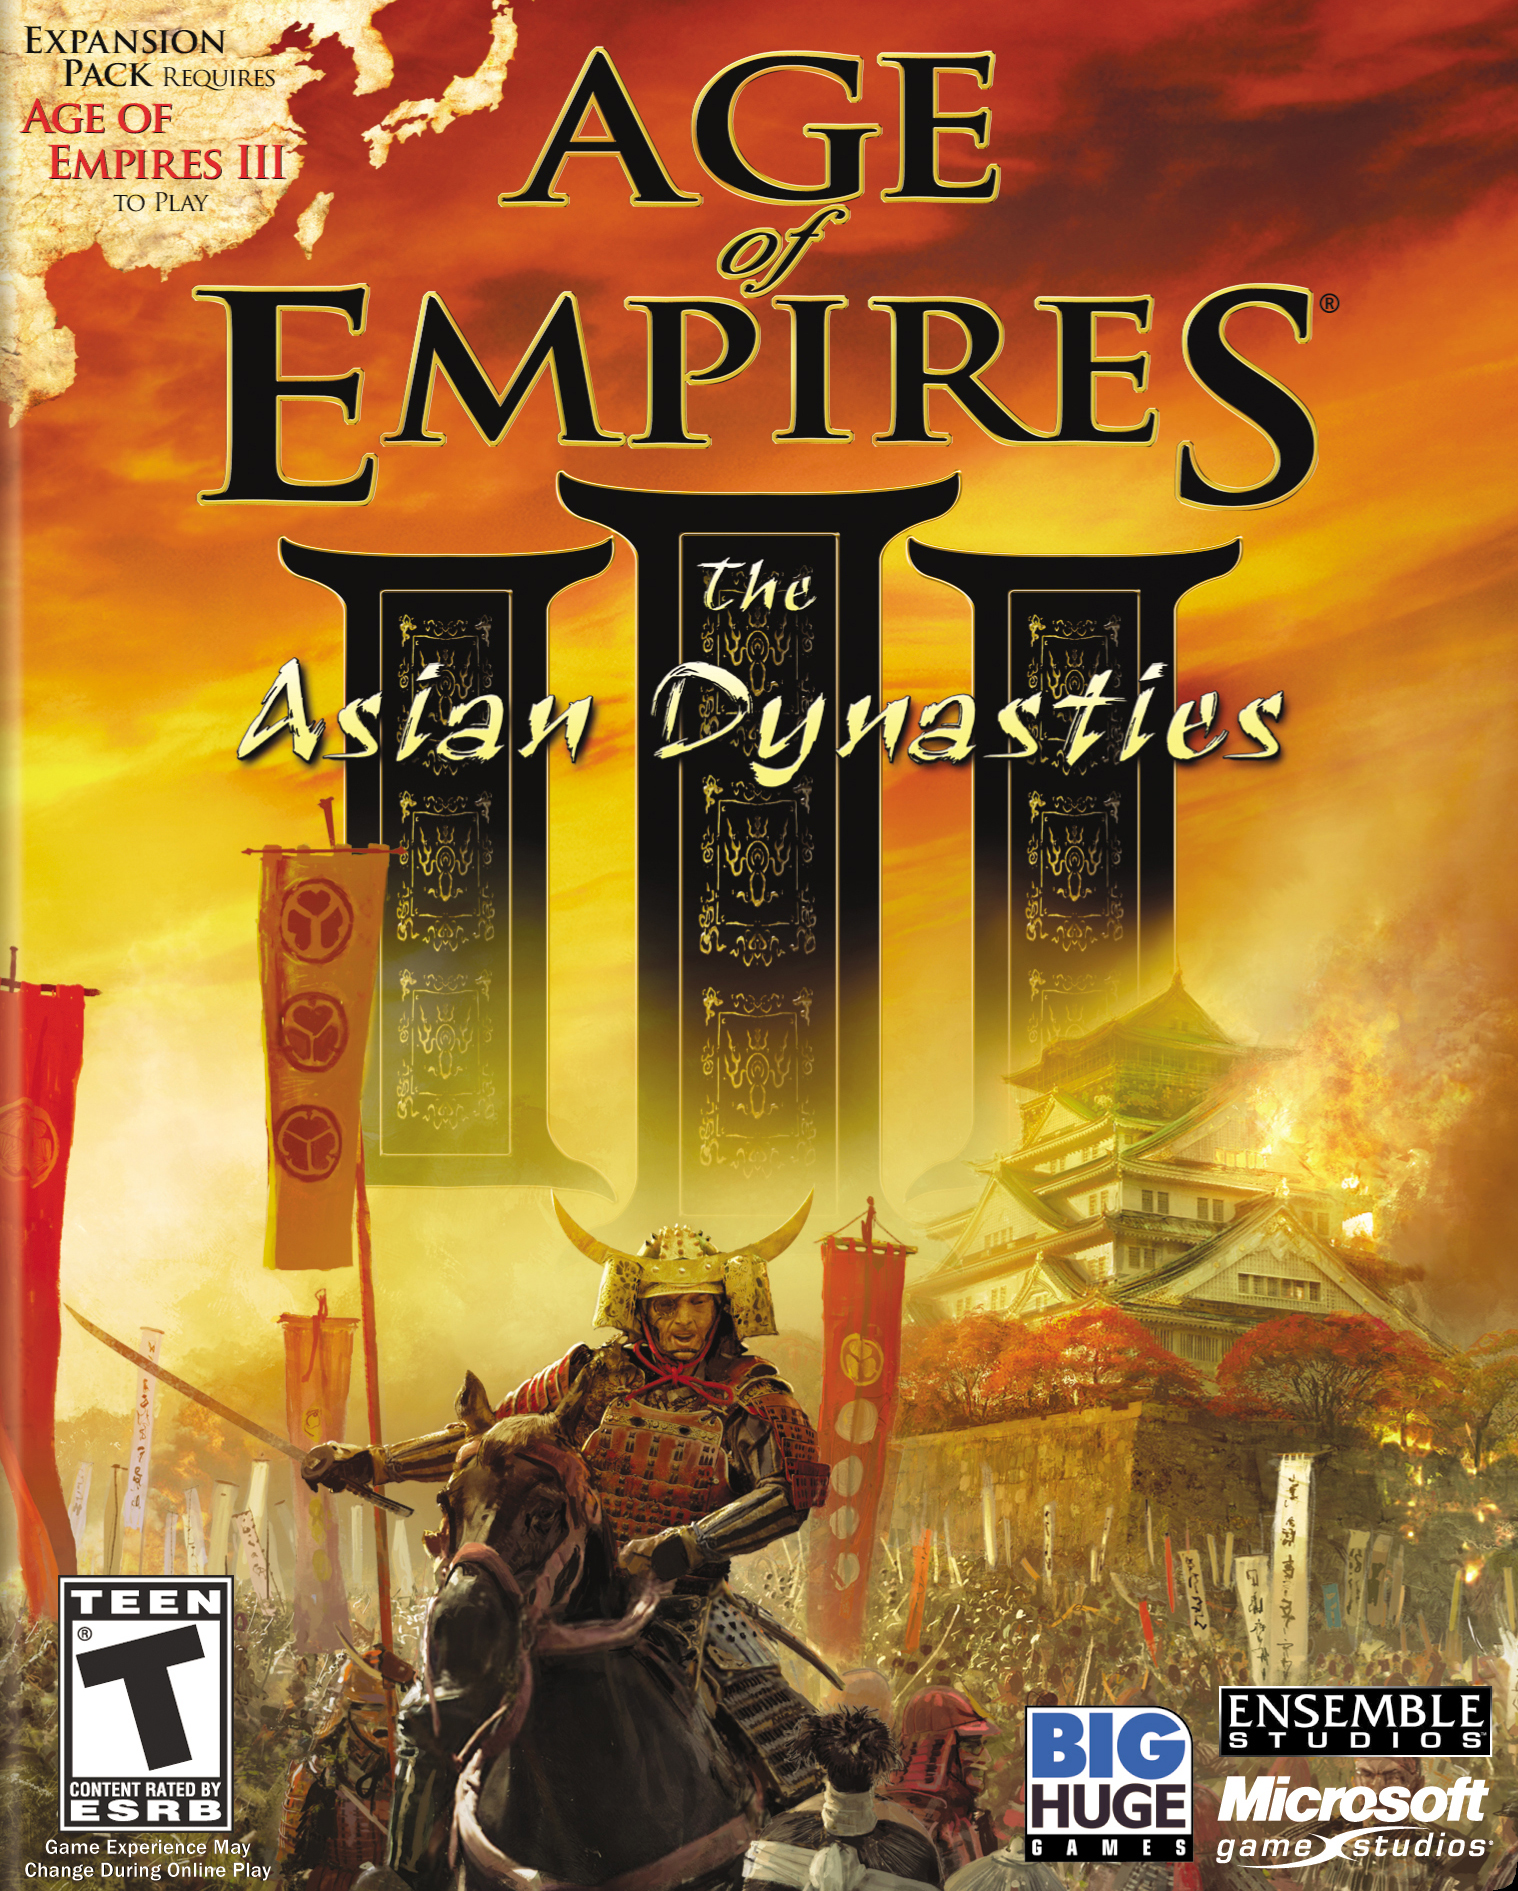 play games like age of empires online free